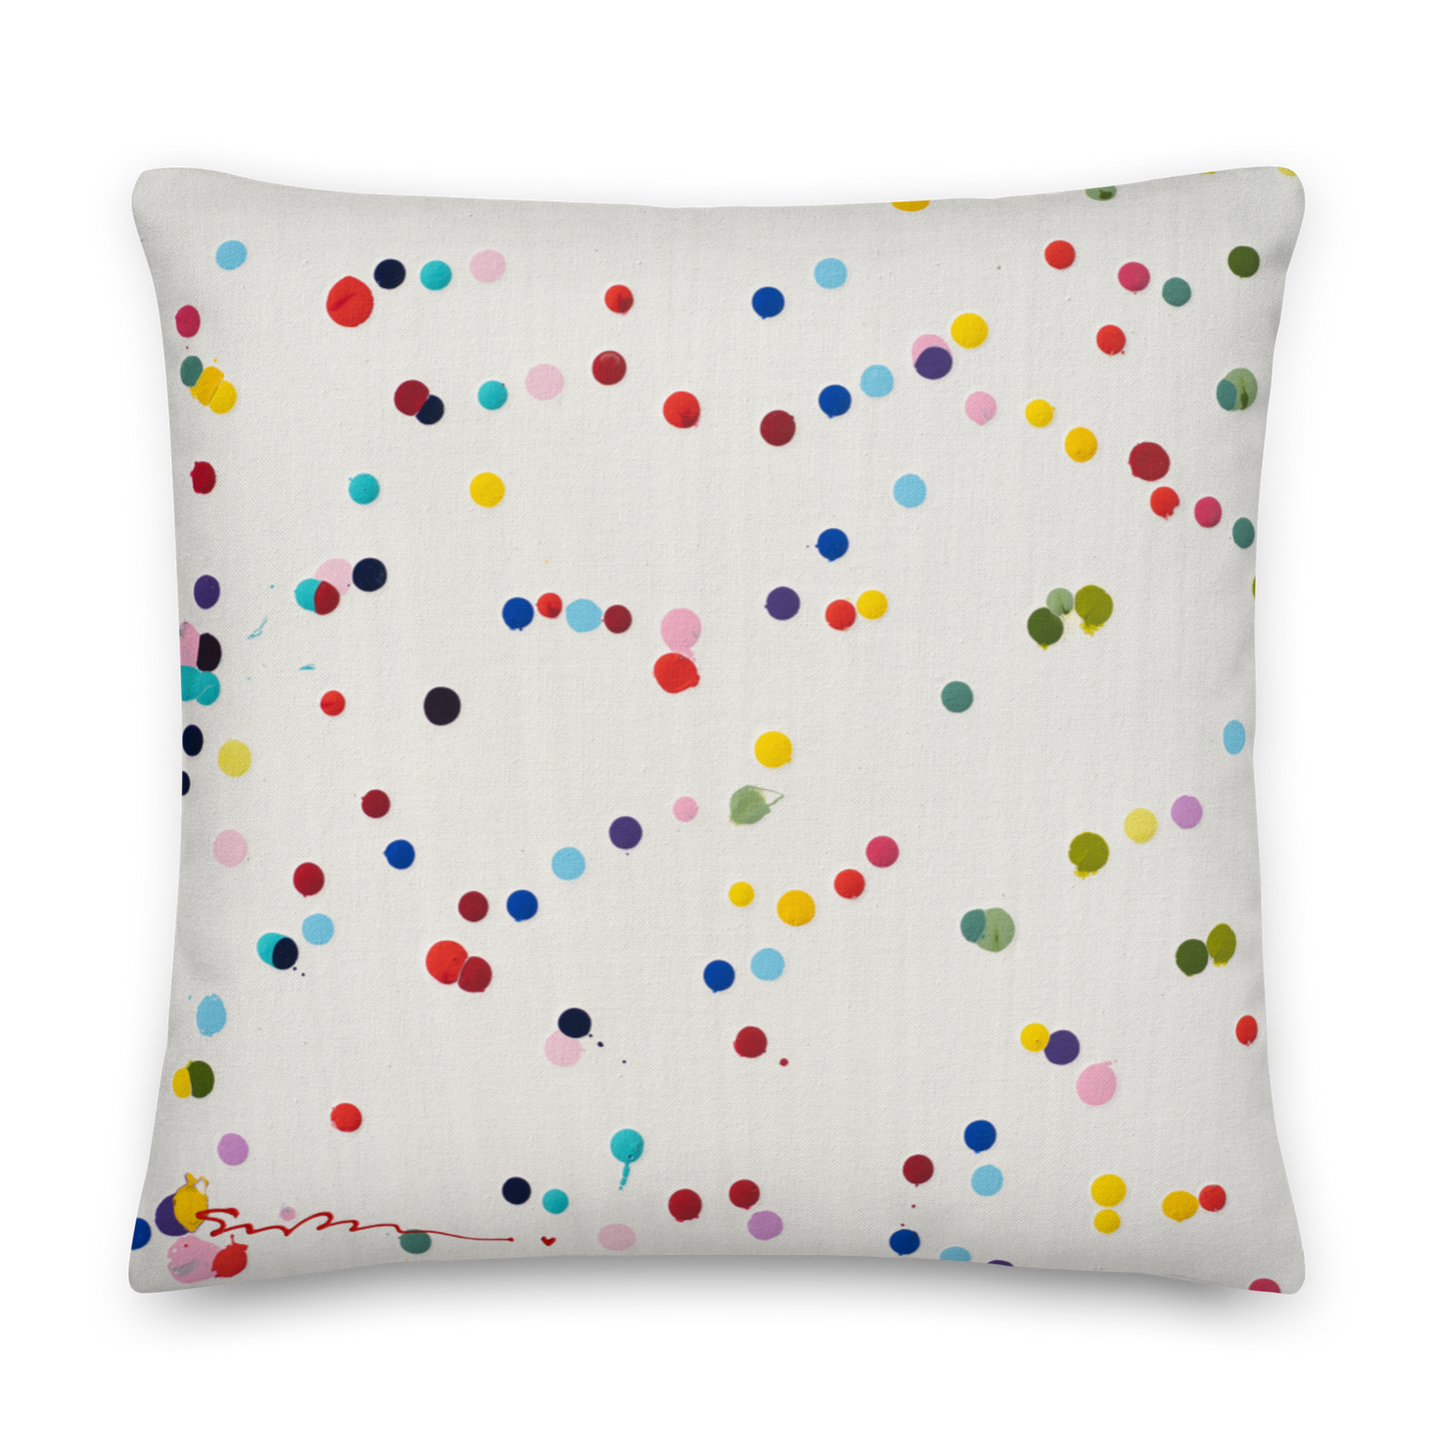 Multiply - Double Sided Pillow